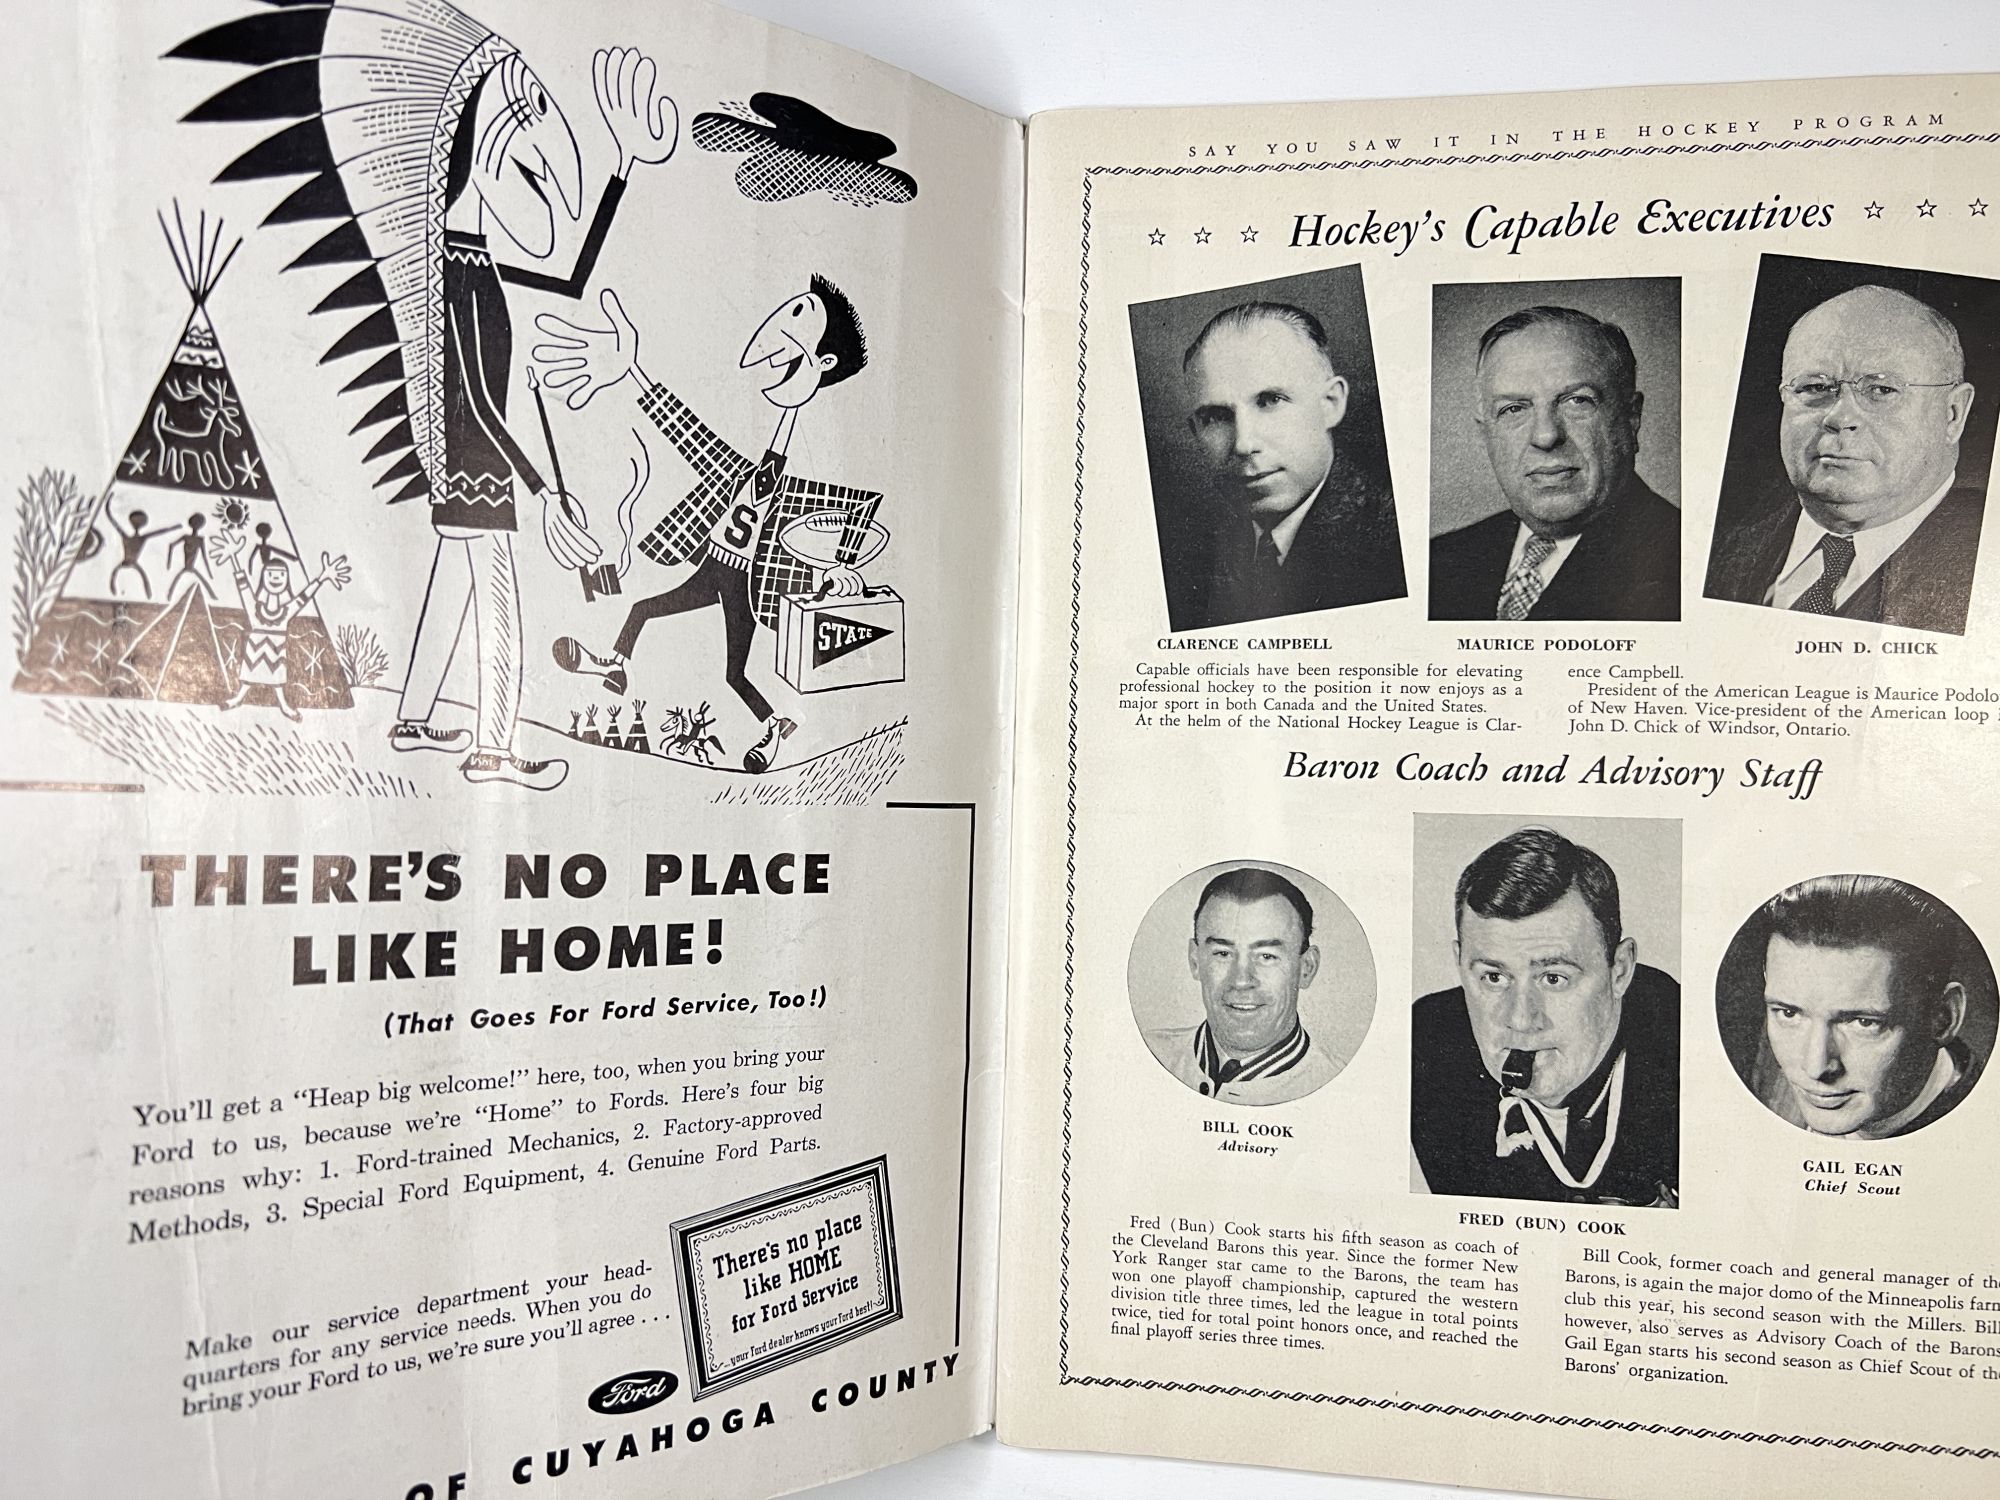 Program Yearbook for Cleveland Barons, 1947 - 1948, American